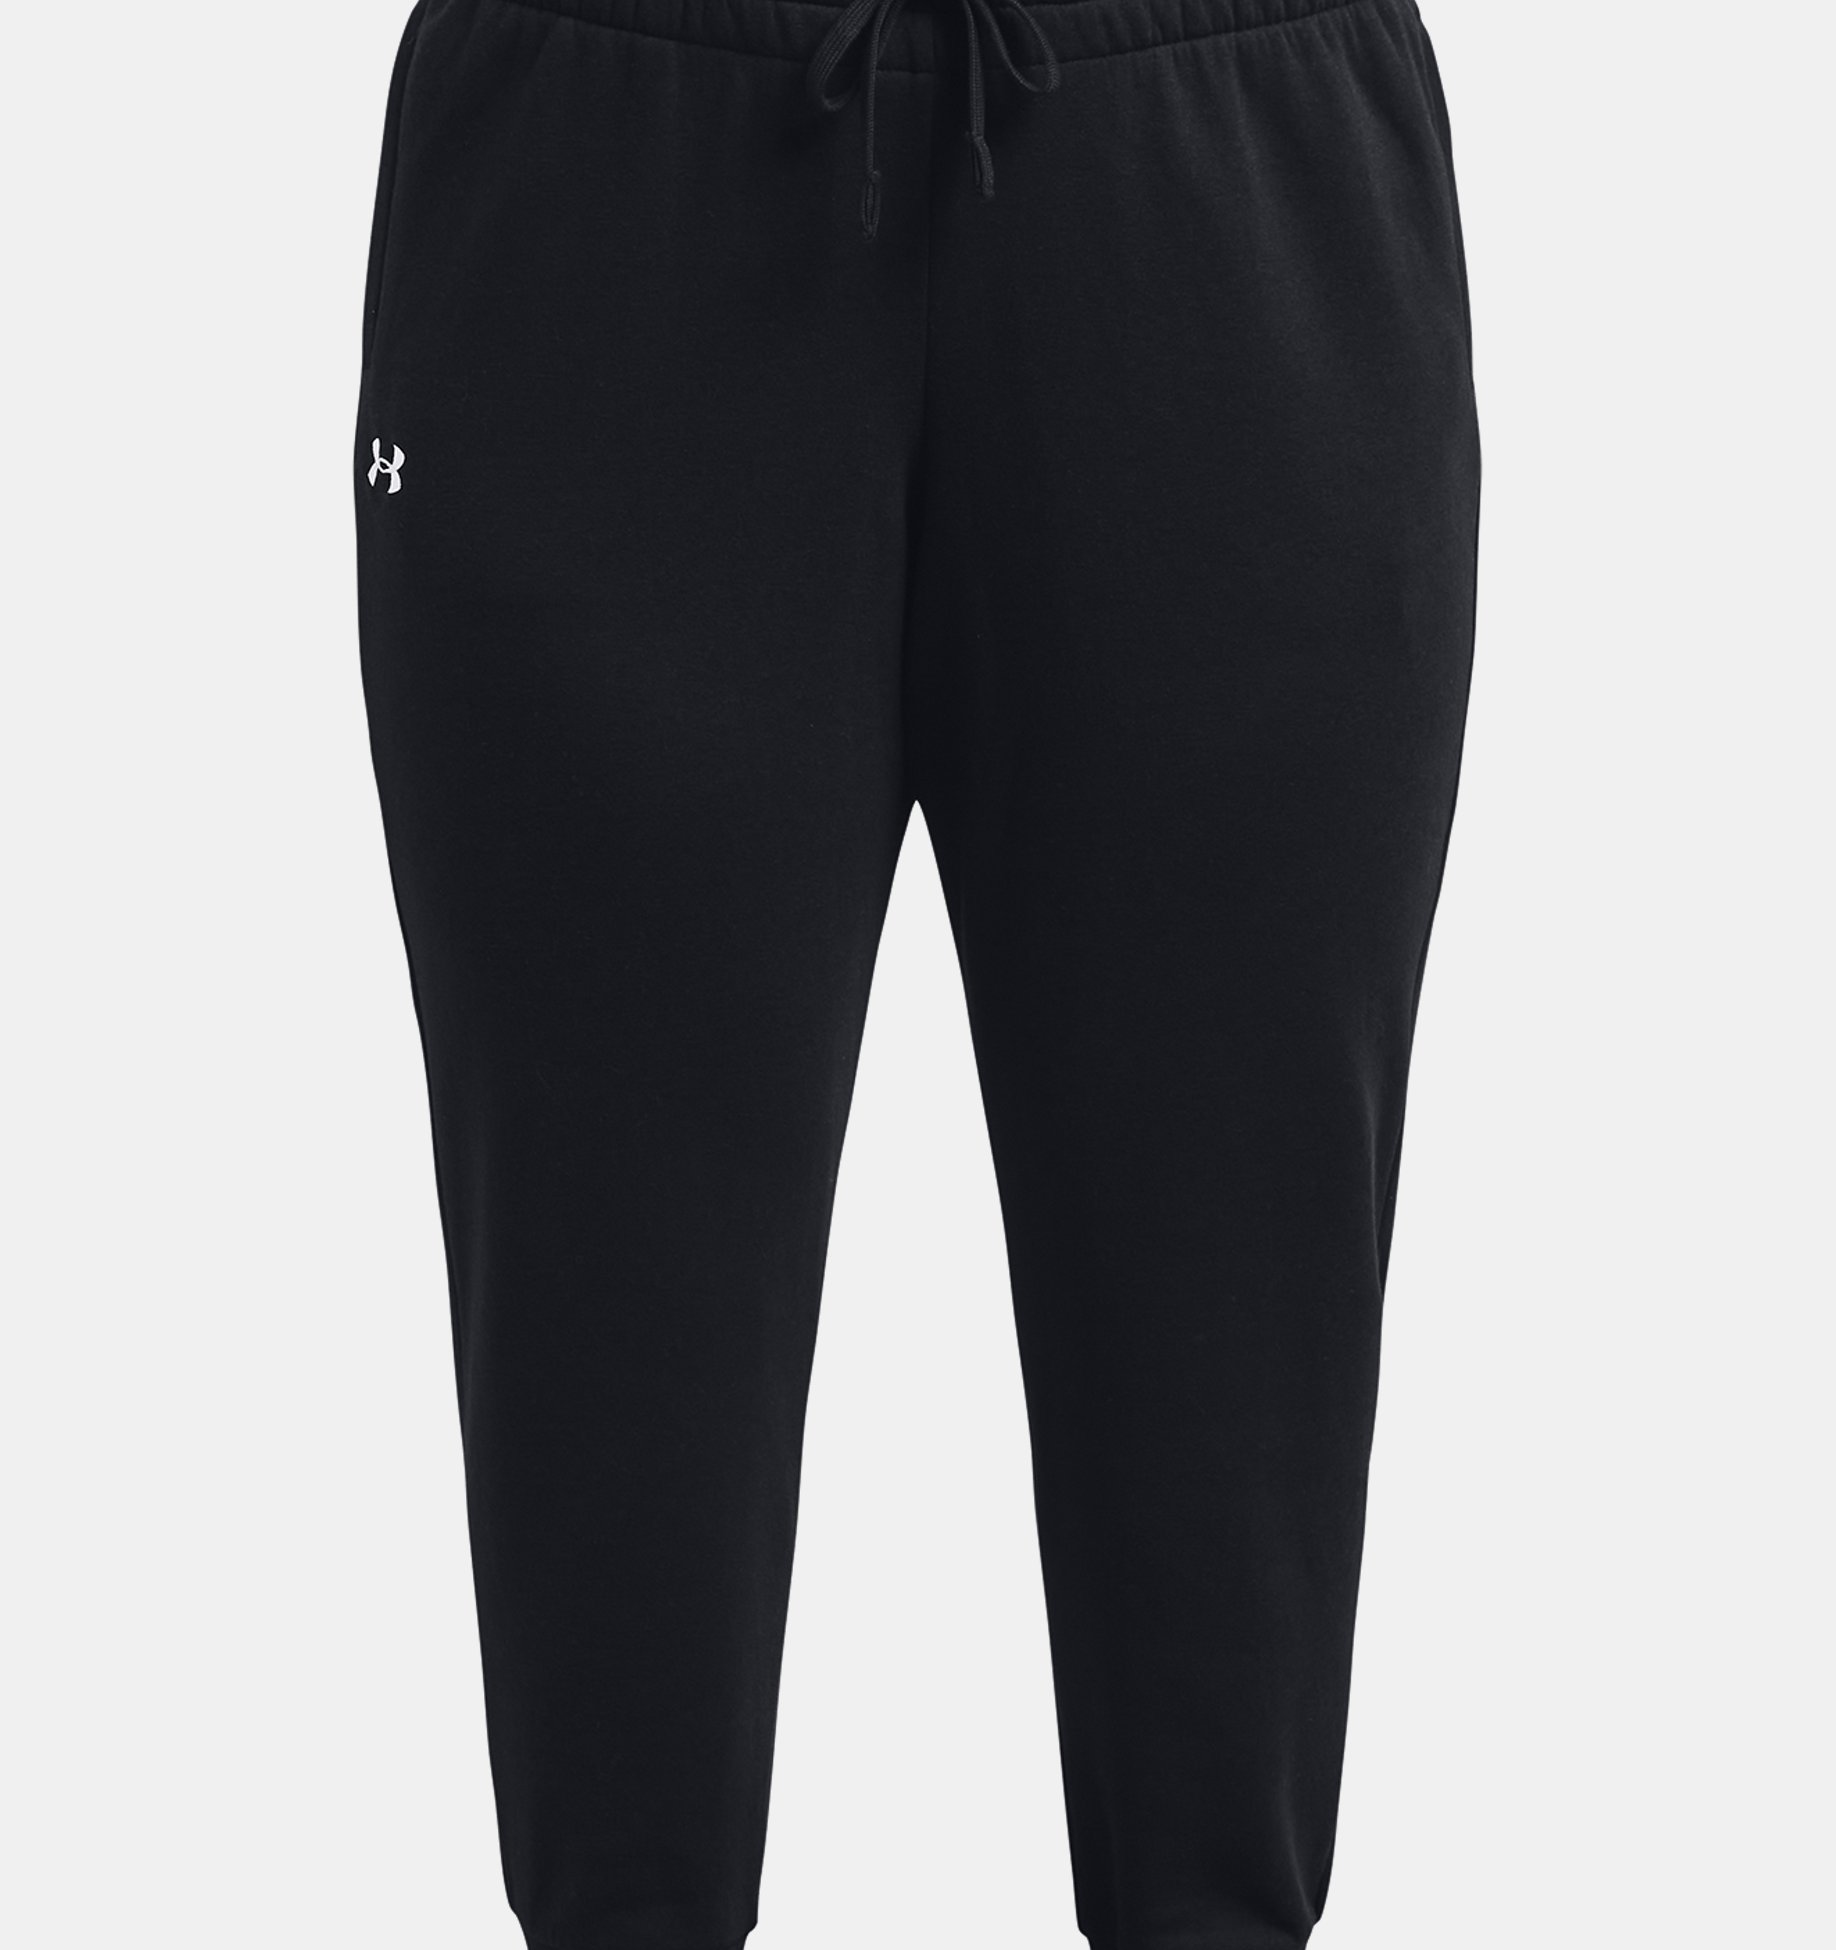 Buy Under Armour Women's Rival Fleece Joggers (Retro Pink/White/White, Size  M) Online  . The Under Armour Women’s Rival Fleece Joggers  are your new favorite warm-up pants for pretty much everything you